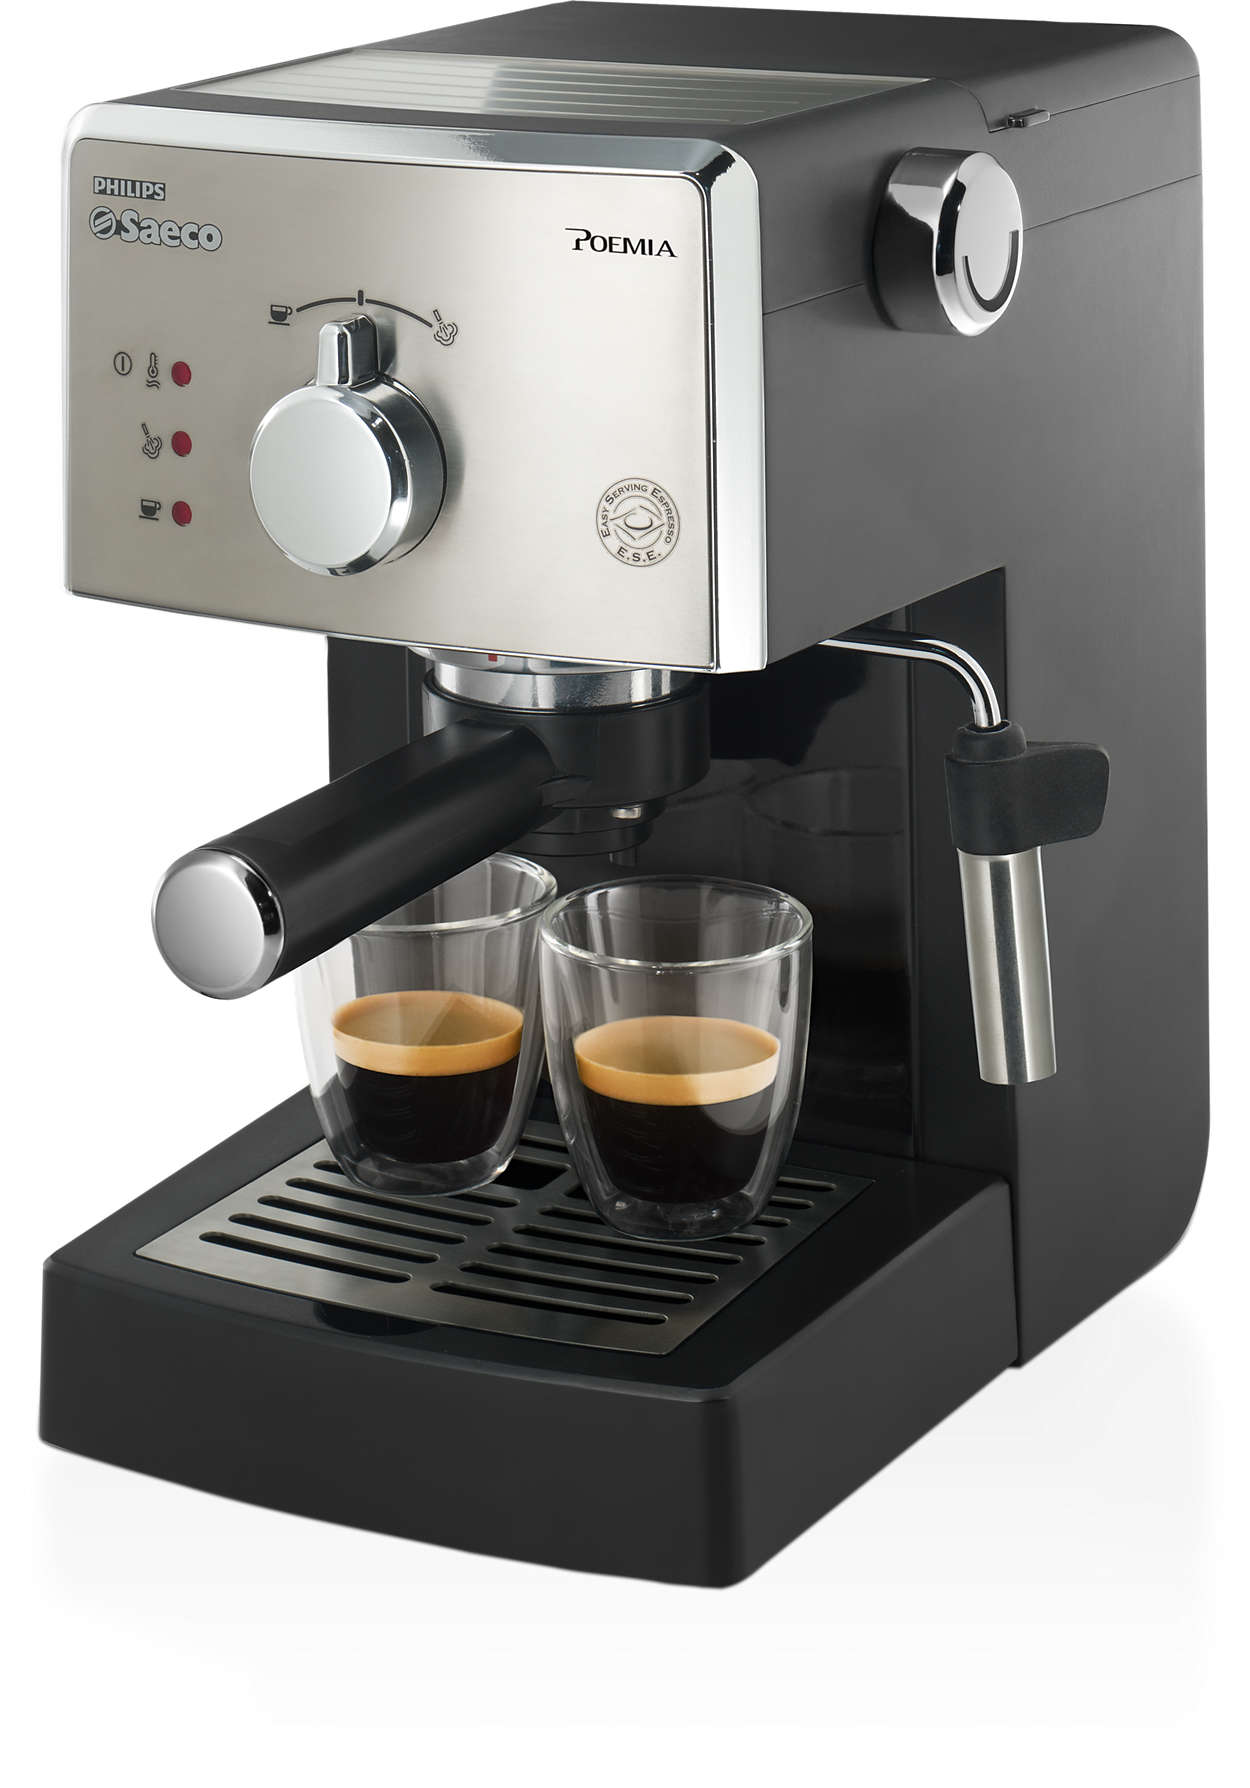 Review: Philips Saeco Poemia Espresso Machine - Canadian Reviewer -  Reviews, News and Opinion with a Canadian Perspective